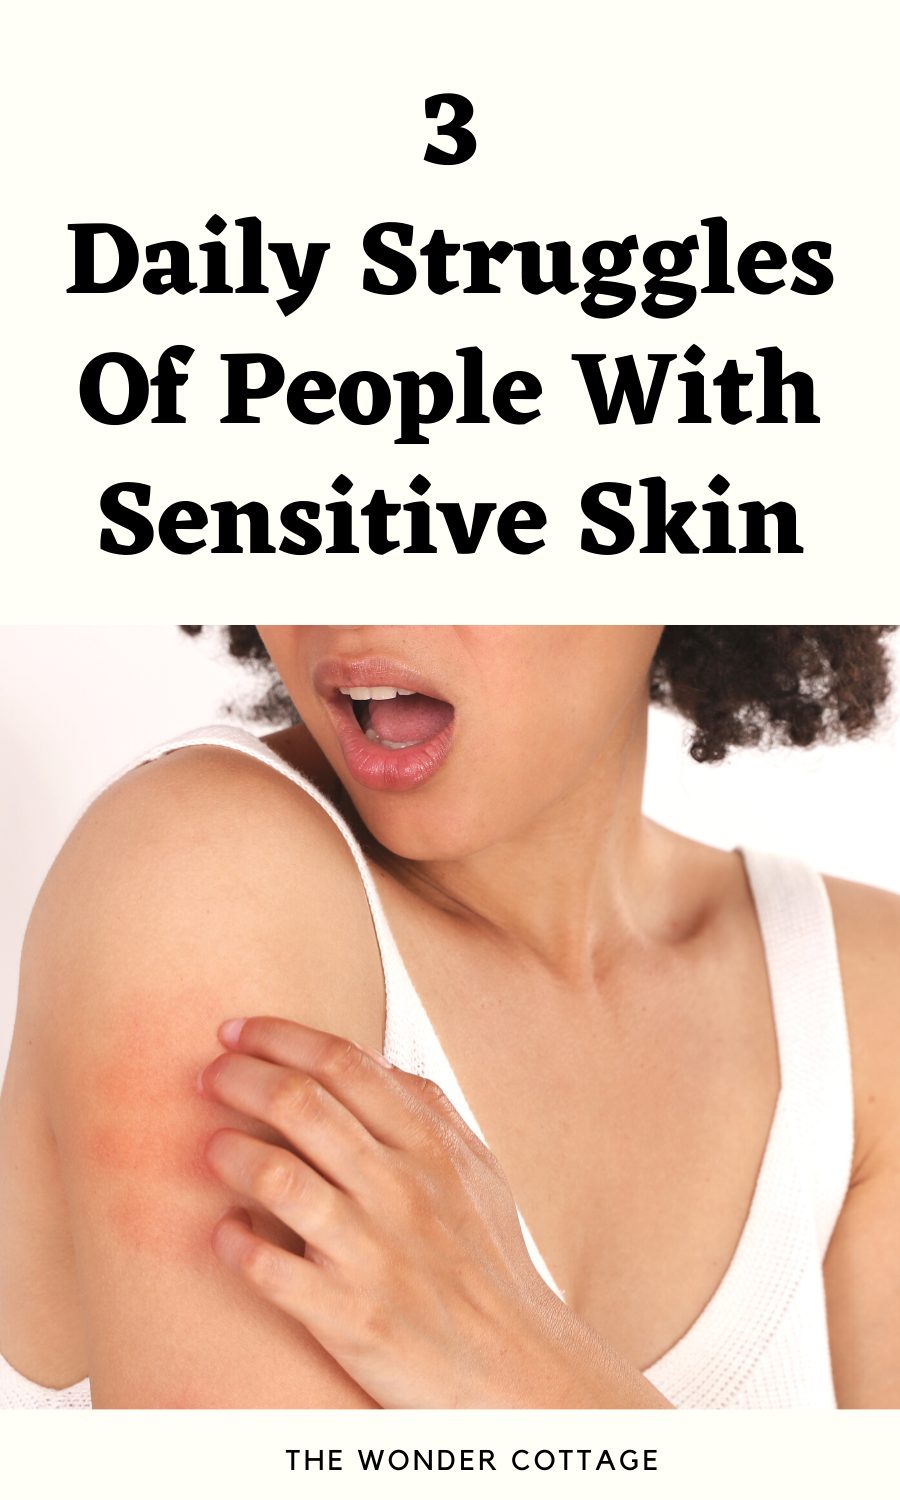 Daily Struggles Of People With Sensitive Skin